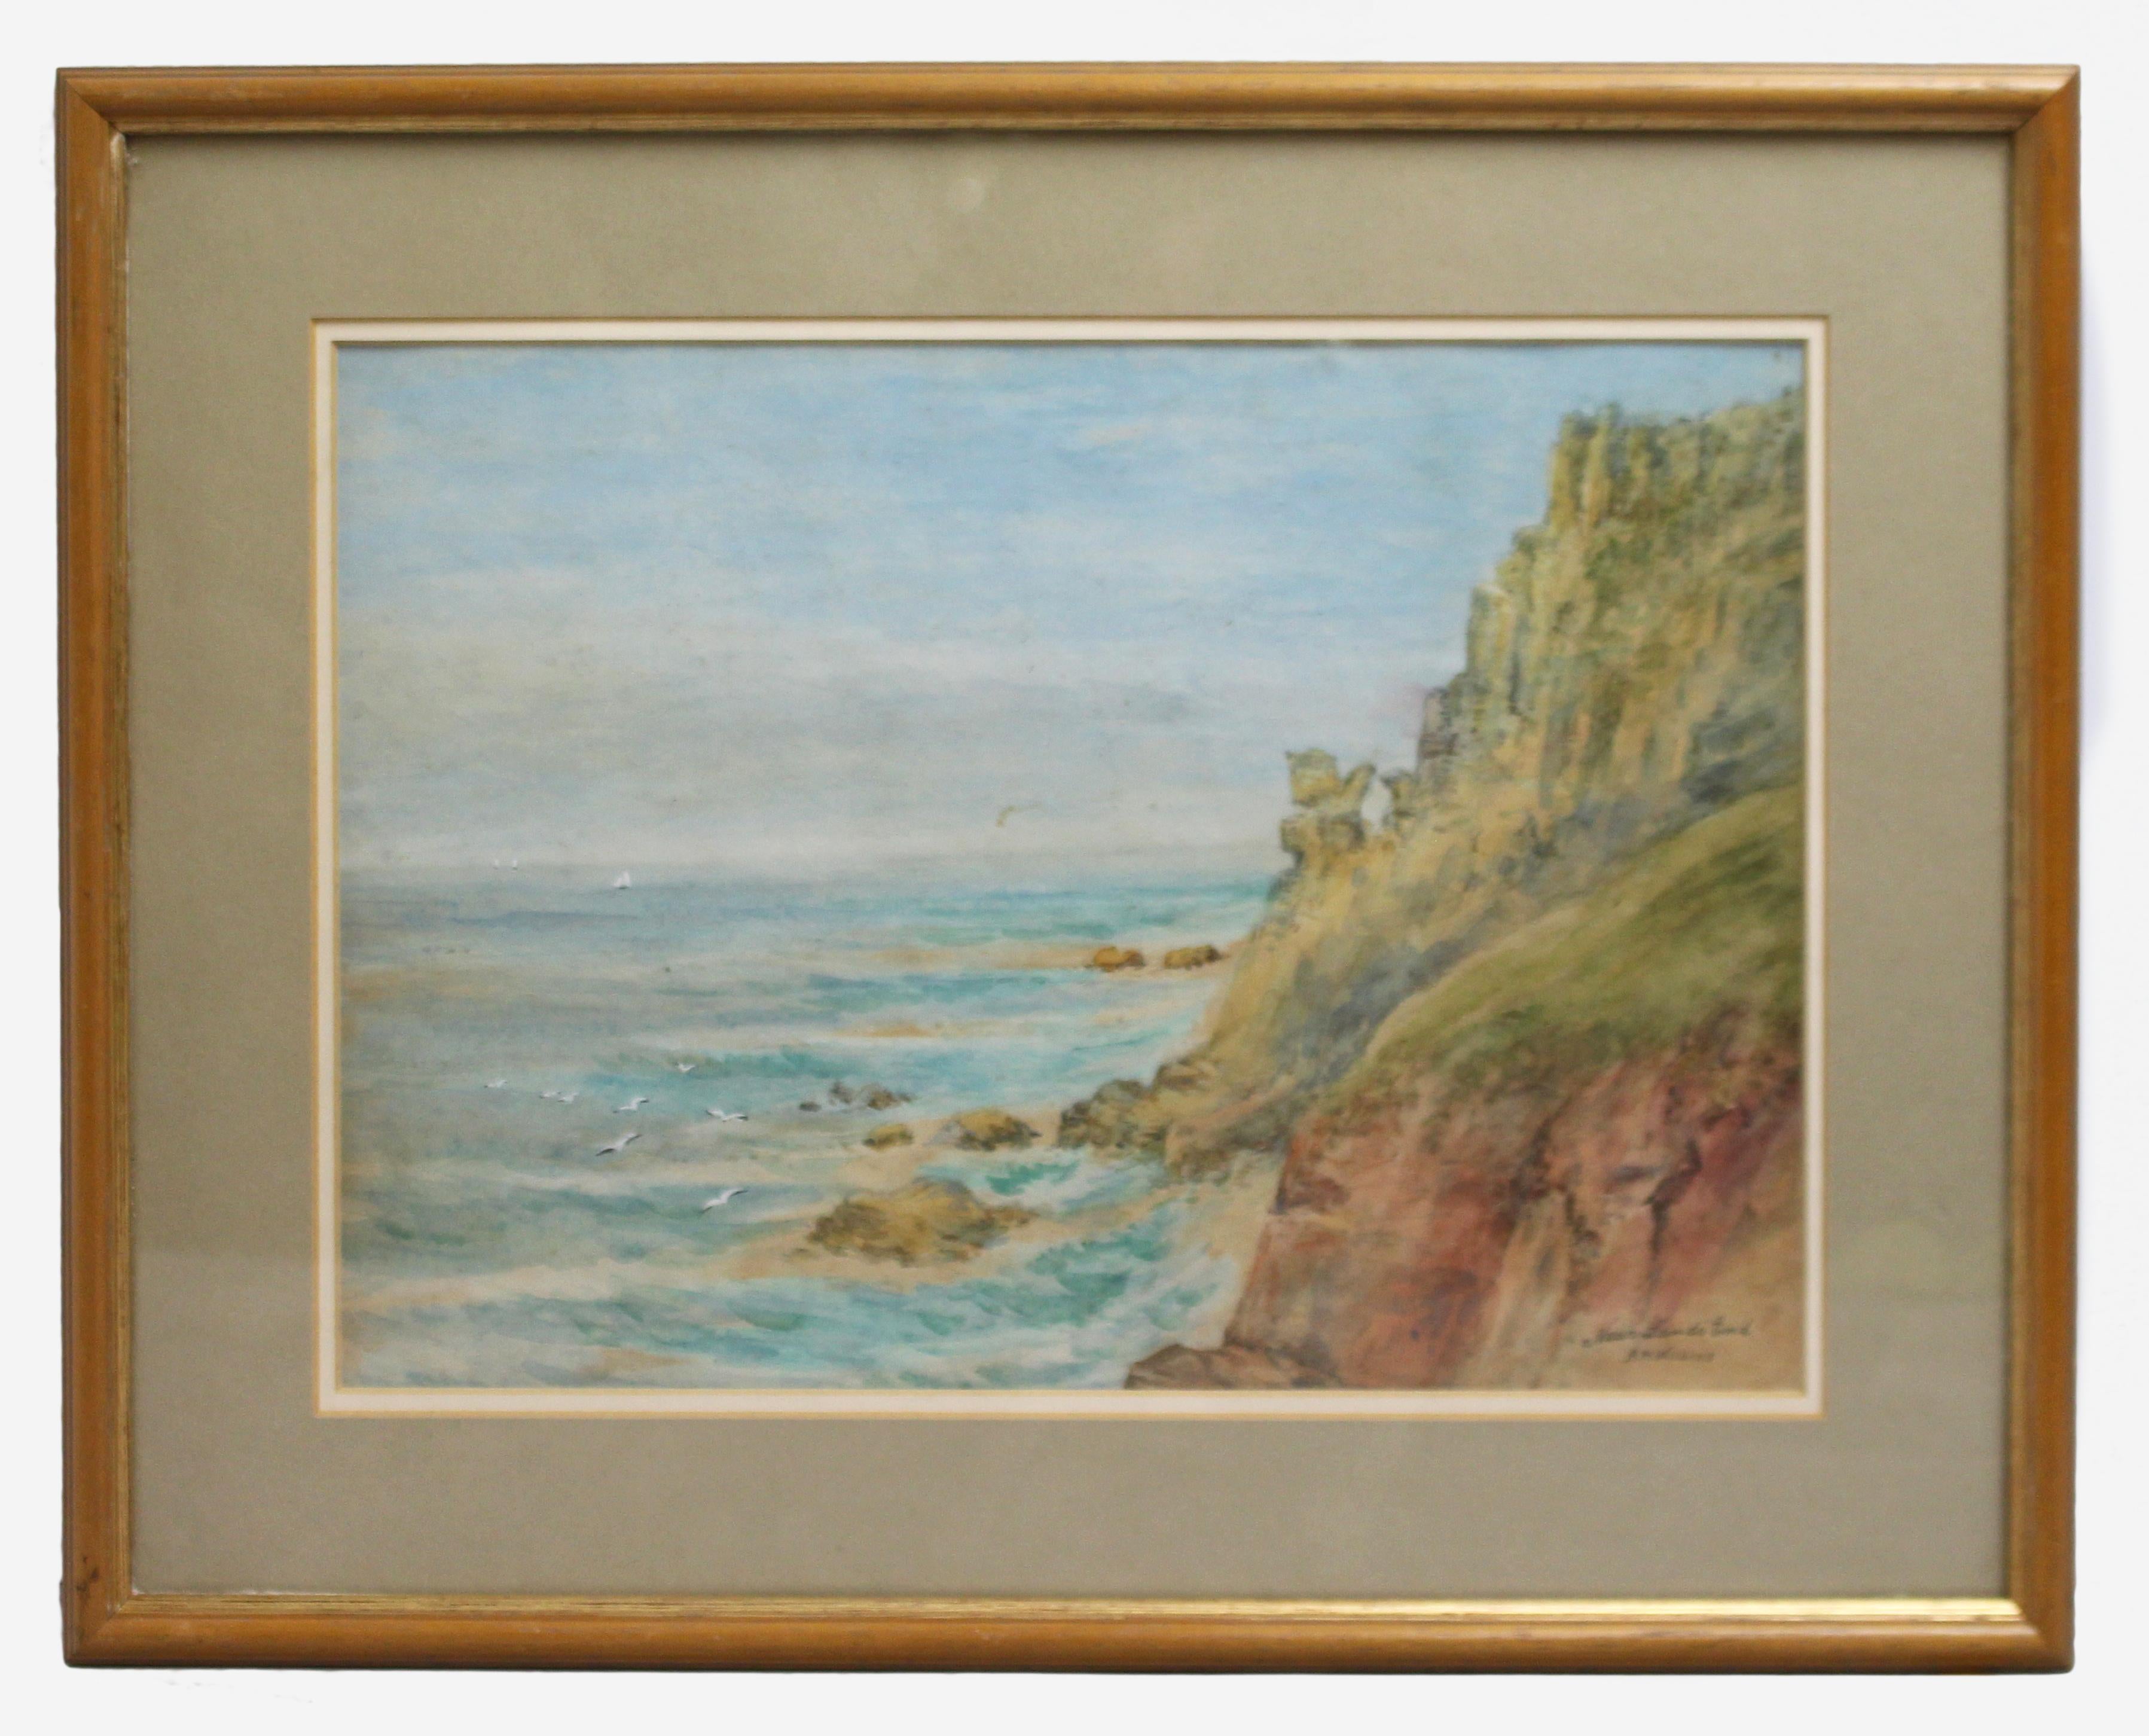 'Near Land's End' A.M.Wilkins Watercolour


Early 20th c., English. Watercolour. 

Frame measures 47 x 37 cm. 

Double mounted & set behind glass in wood & gilt frame. Ready to hang.